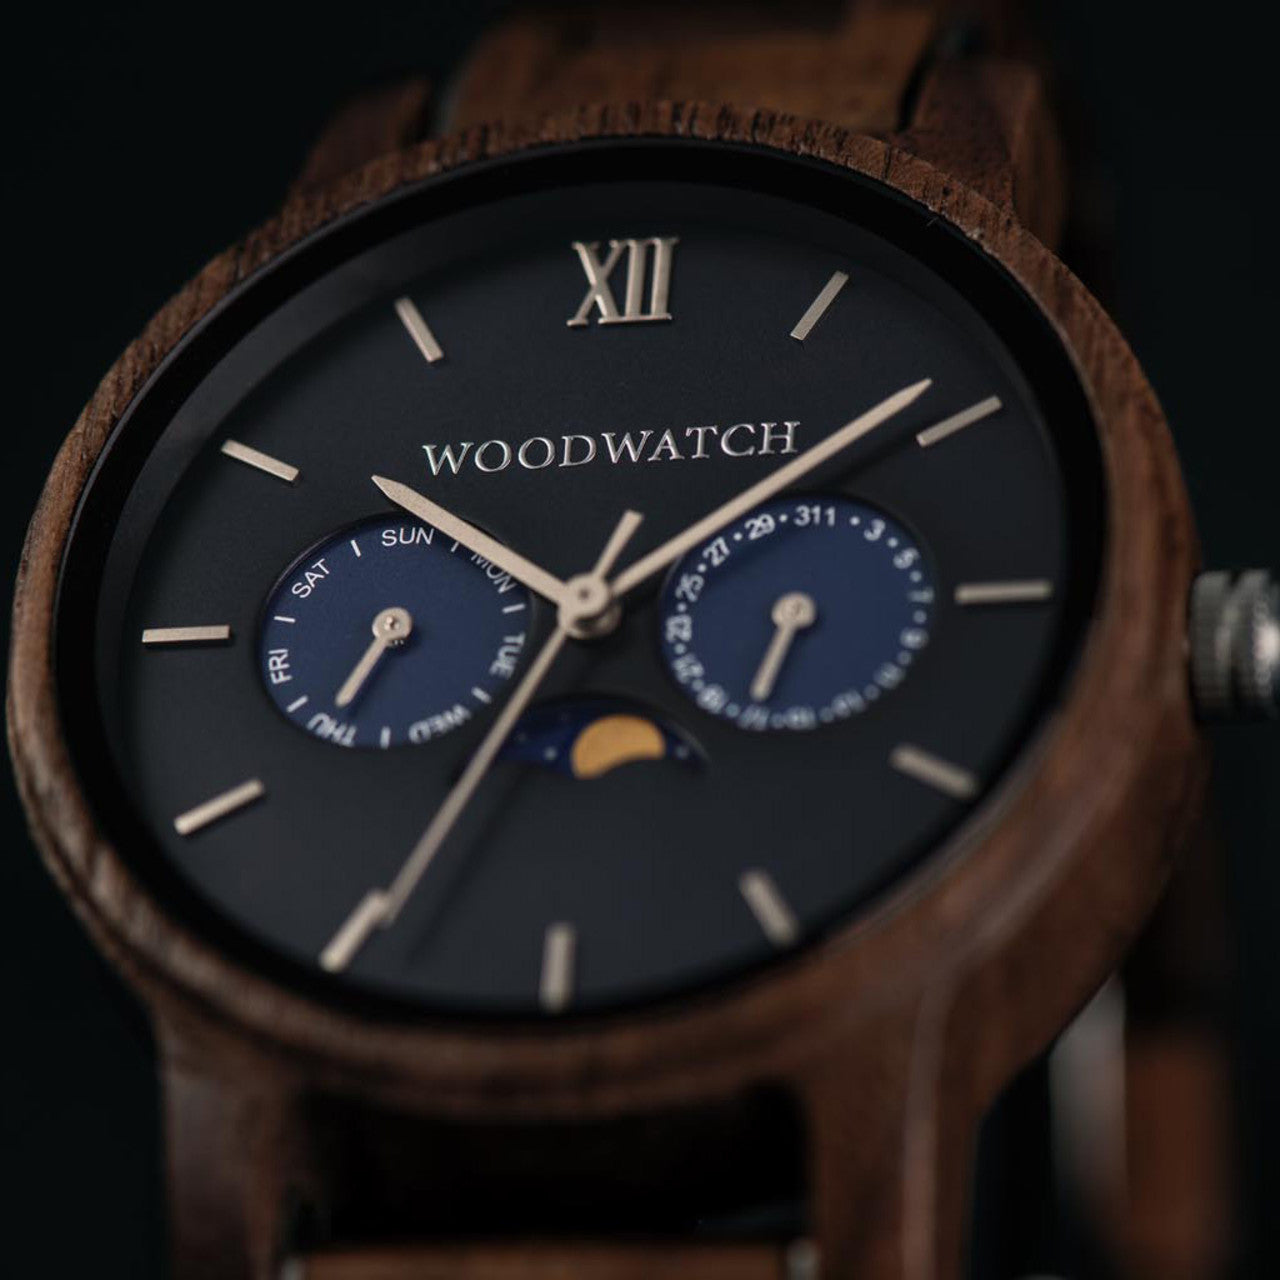 Mariner（マリナー）- CLASSIC Standard collection / WoodWatch